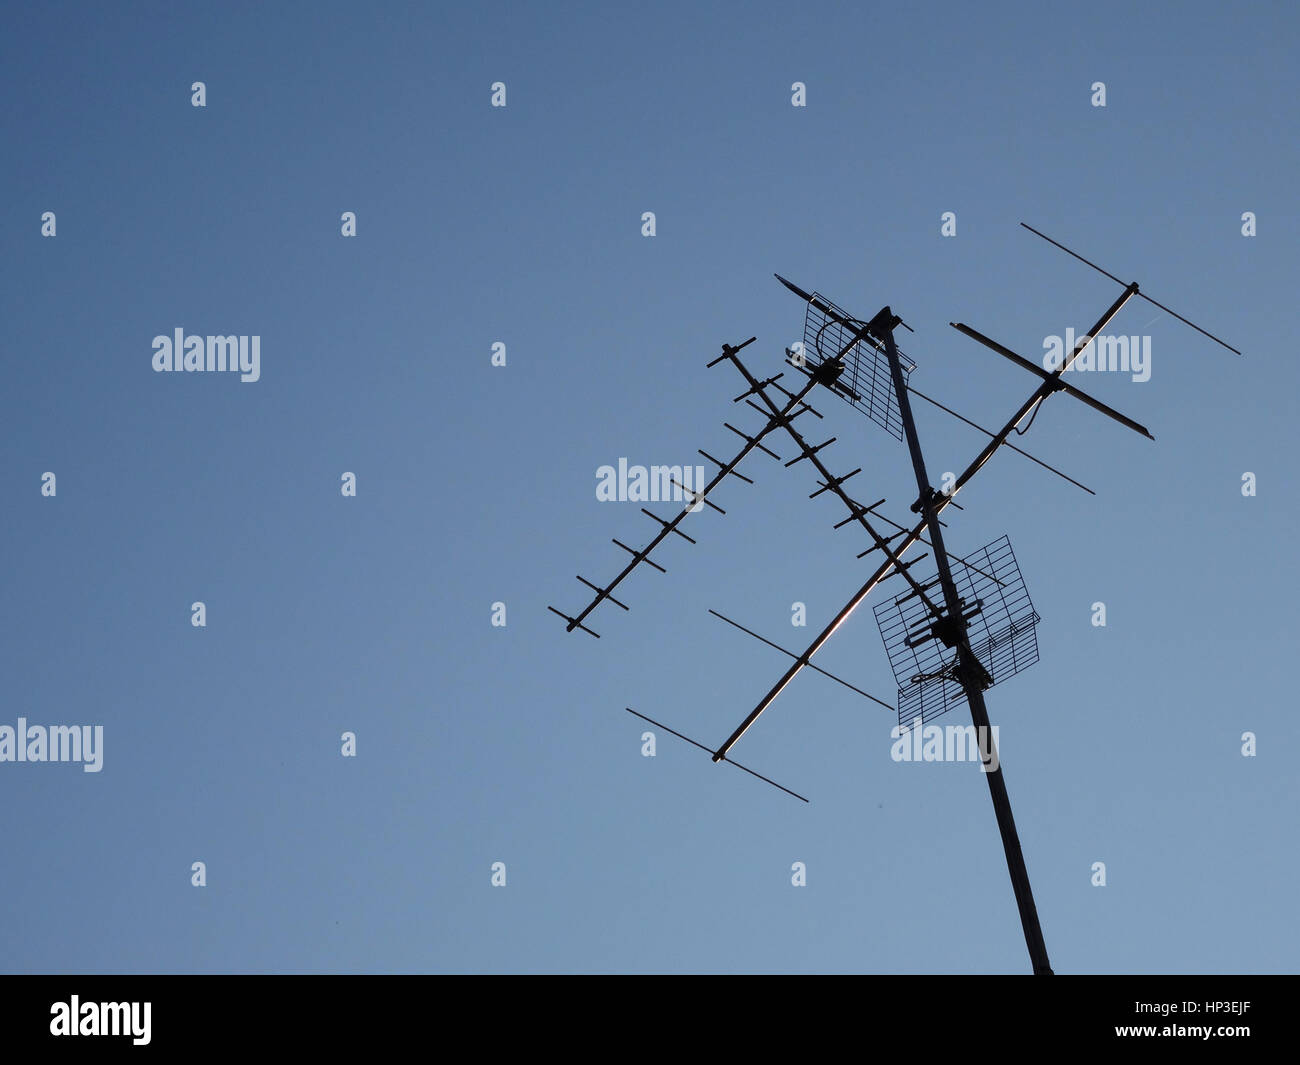 Television receiver antenna against blue sky Stock Photo